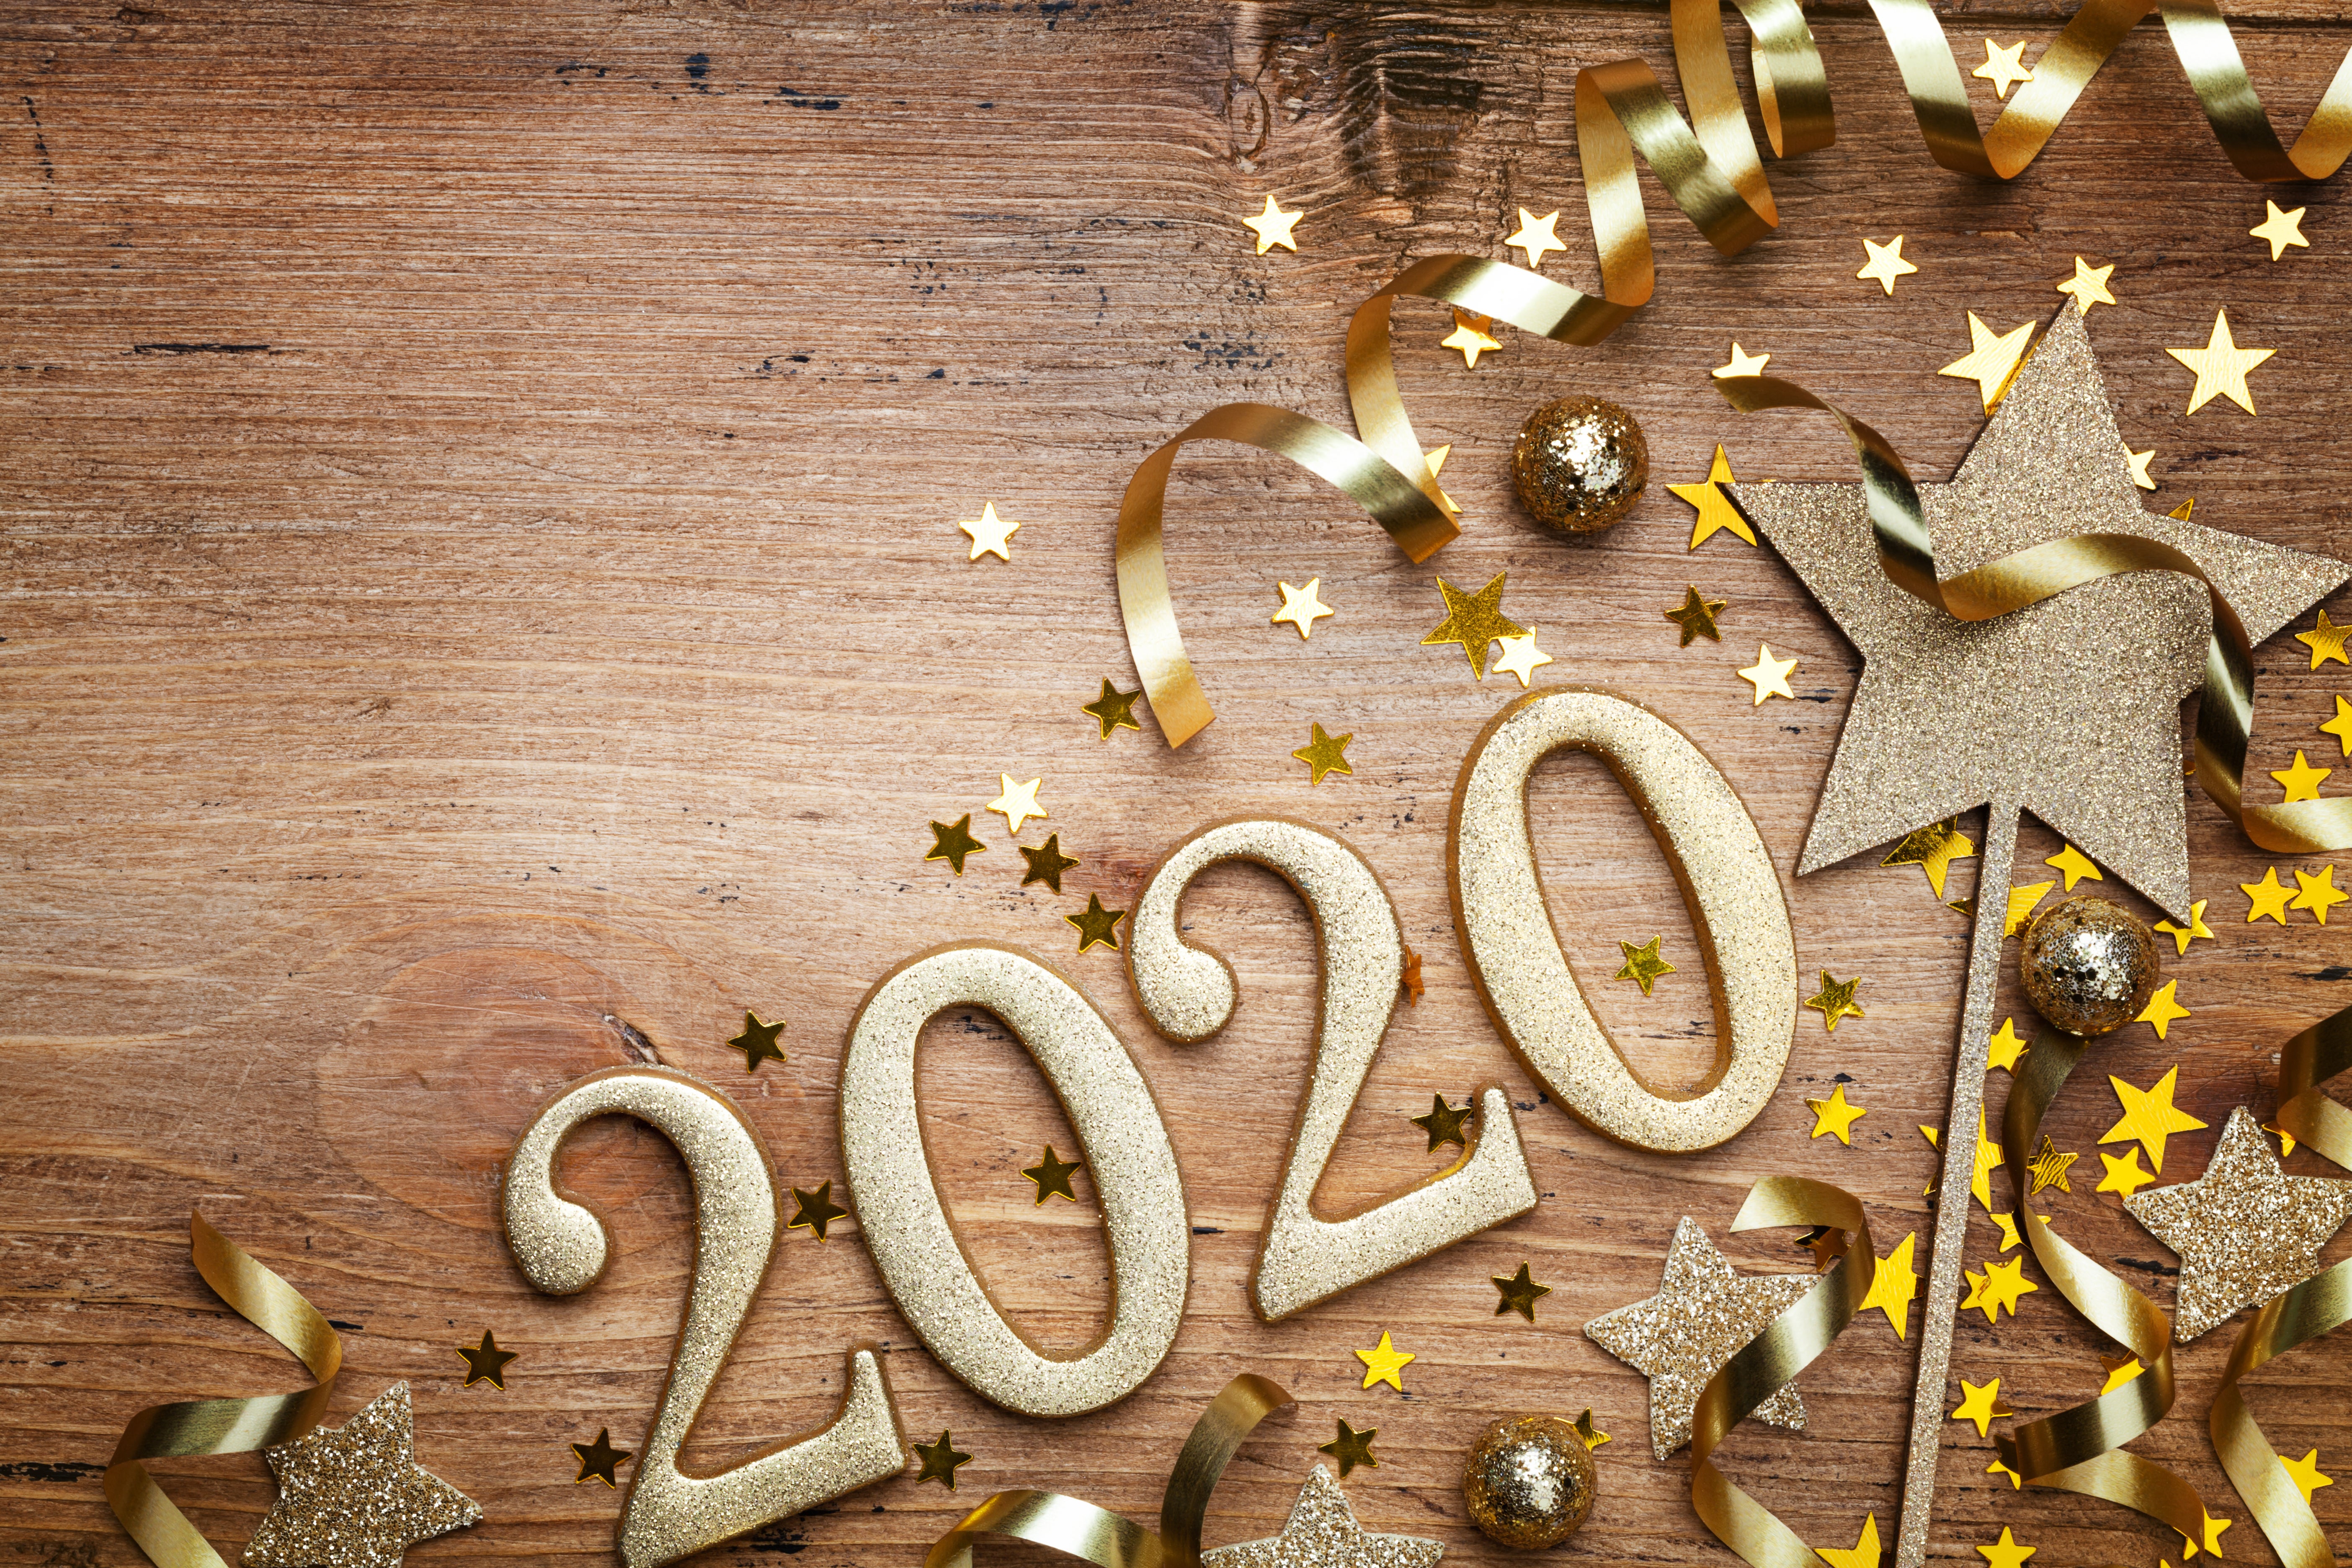 What Restaurants And Stores Are Open On New Year’s Day 2020